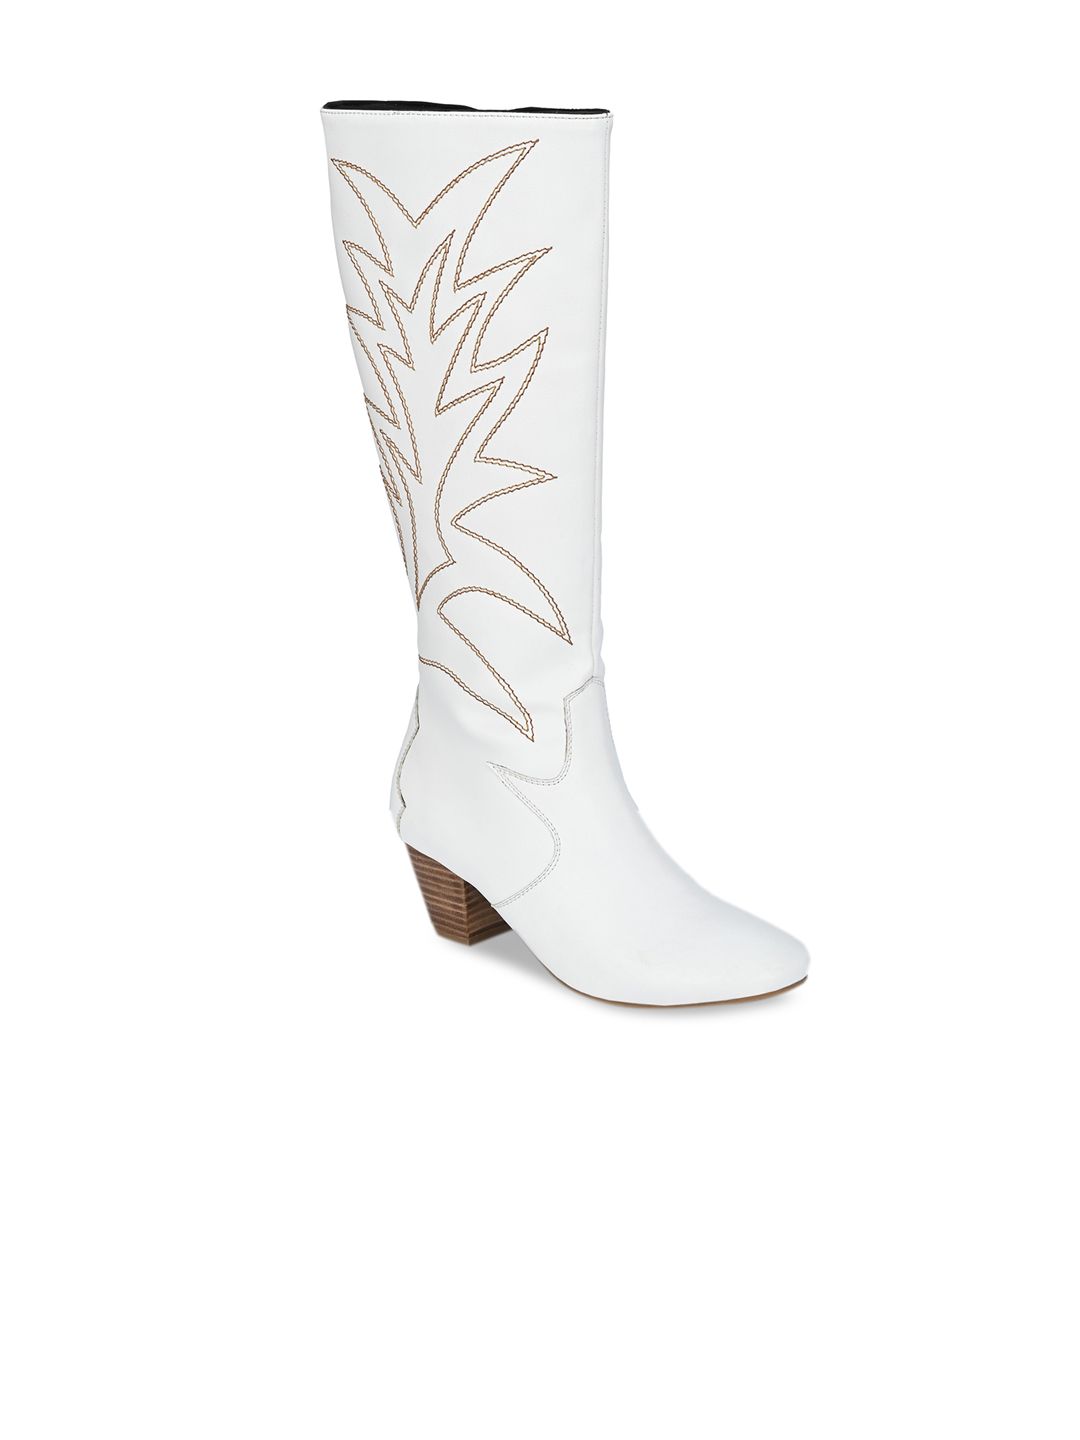 Delize White High-Top Block Heeled Boots Price in India